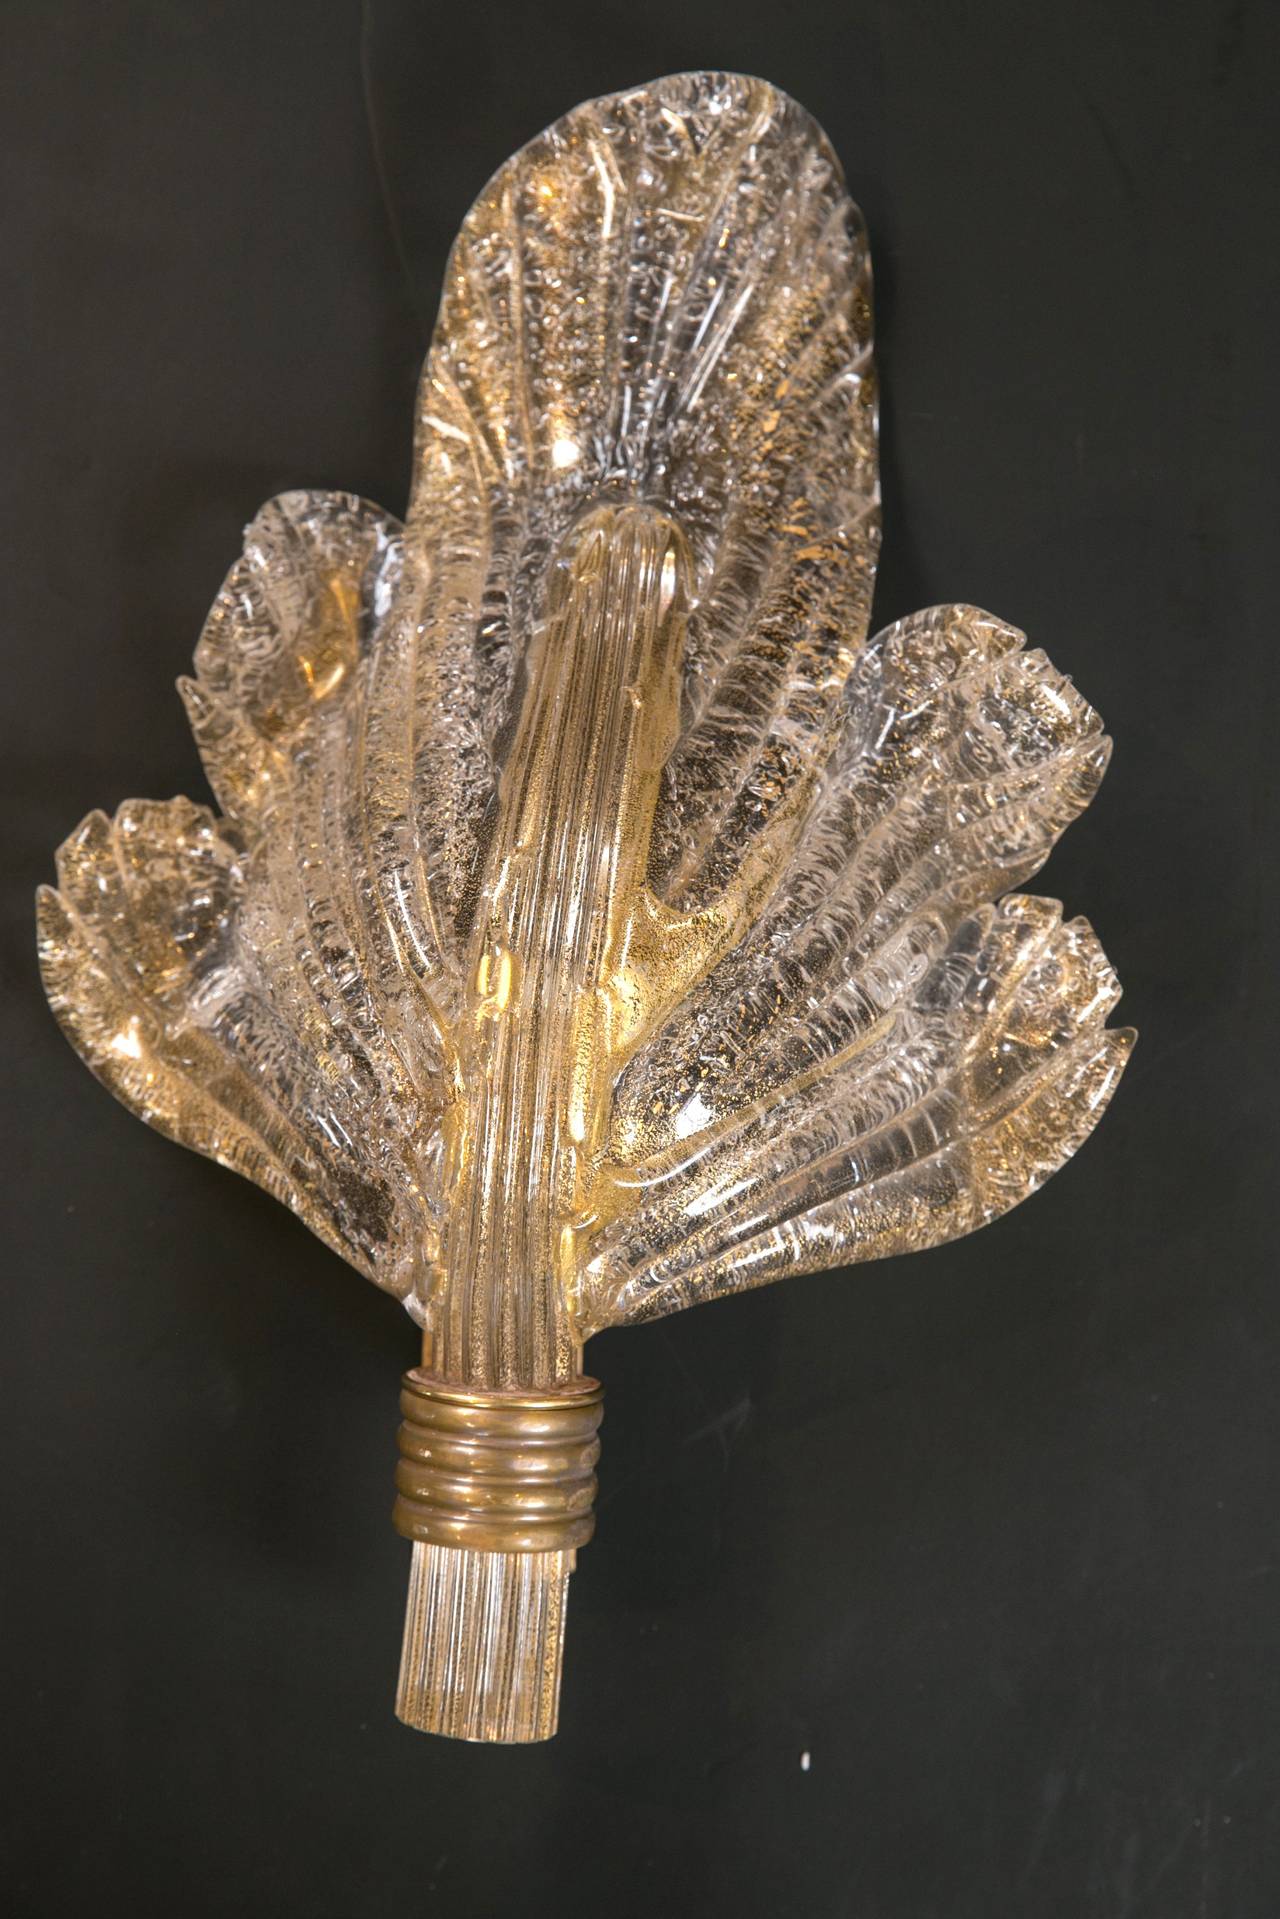 A spectacular set of vintage icy Murano gold blown leaves mounted as wall lights. No leaf identical and blown in free-form. Note undulating movement and expression- Attributed to Barovier from circa 1960s, Venice.
Note the illuminated leaf is lit